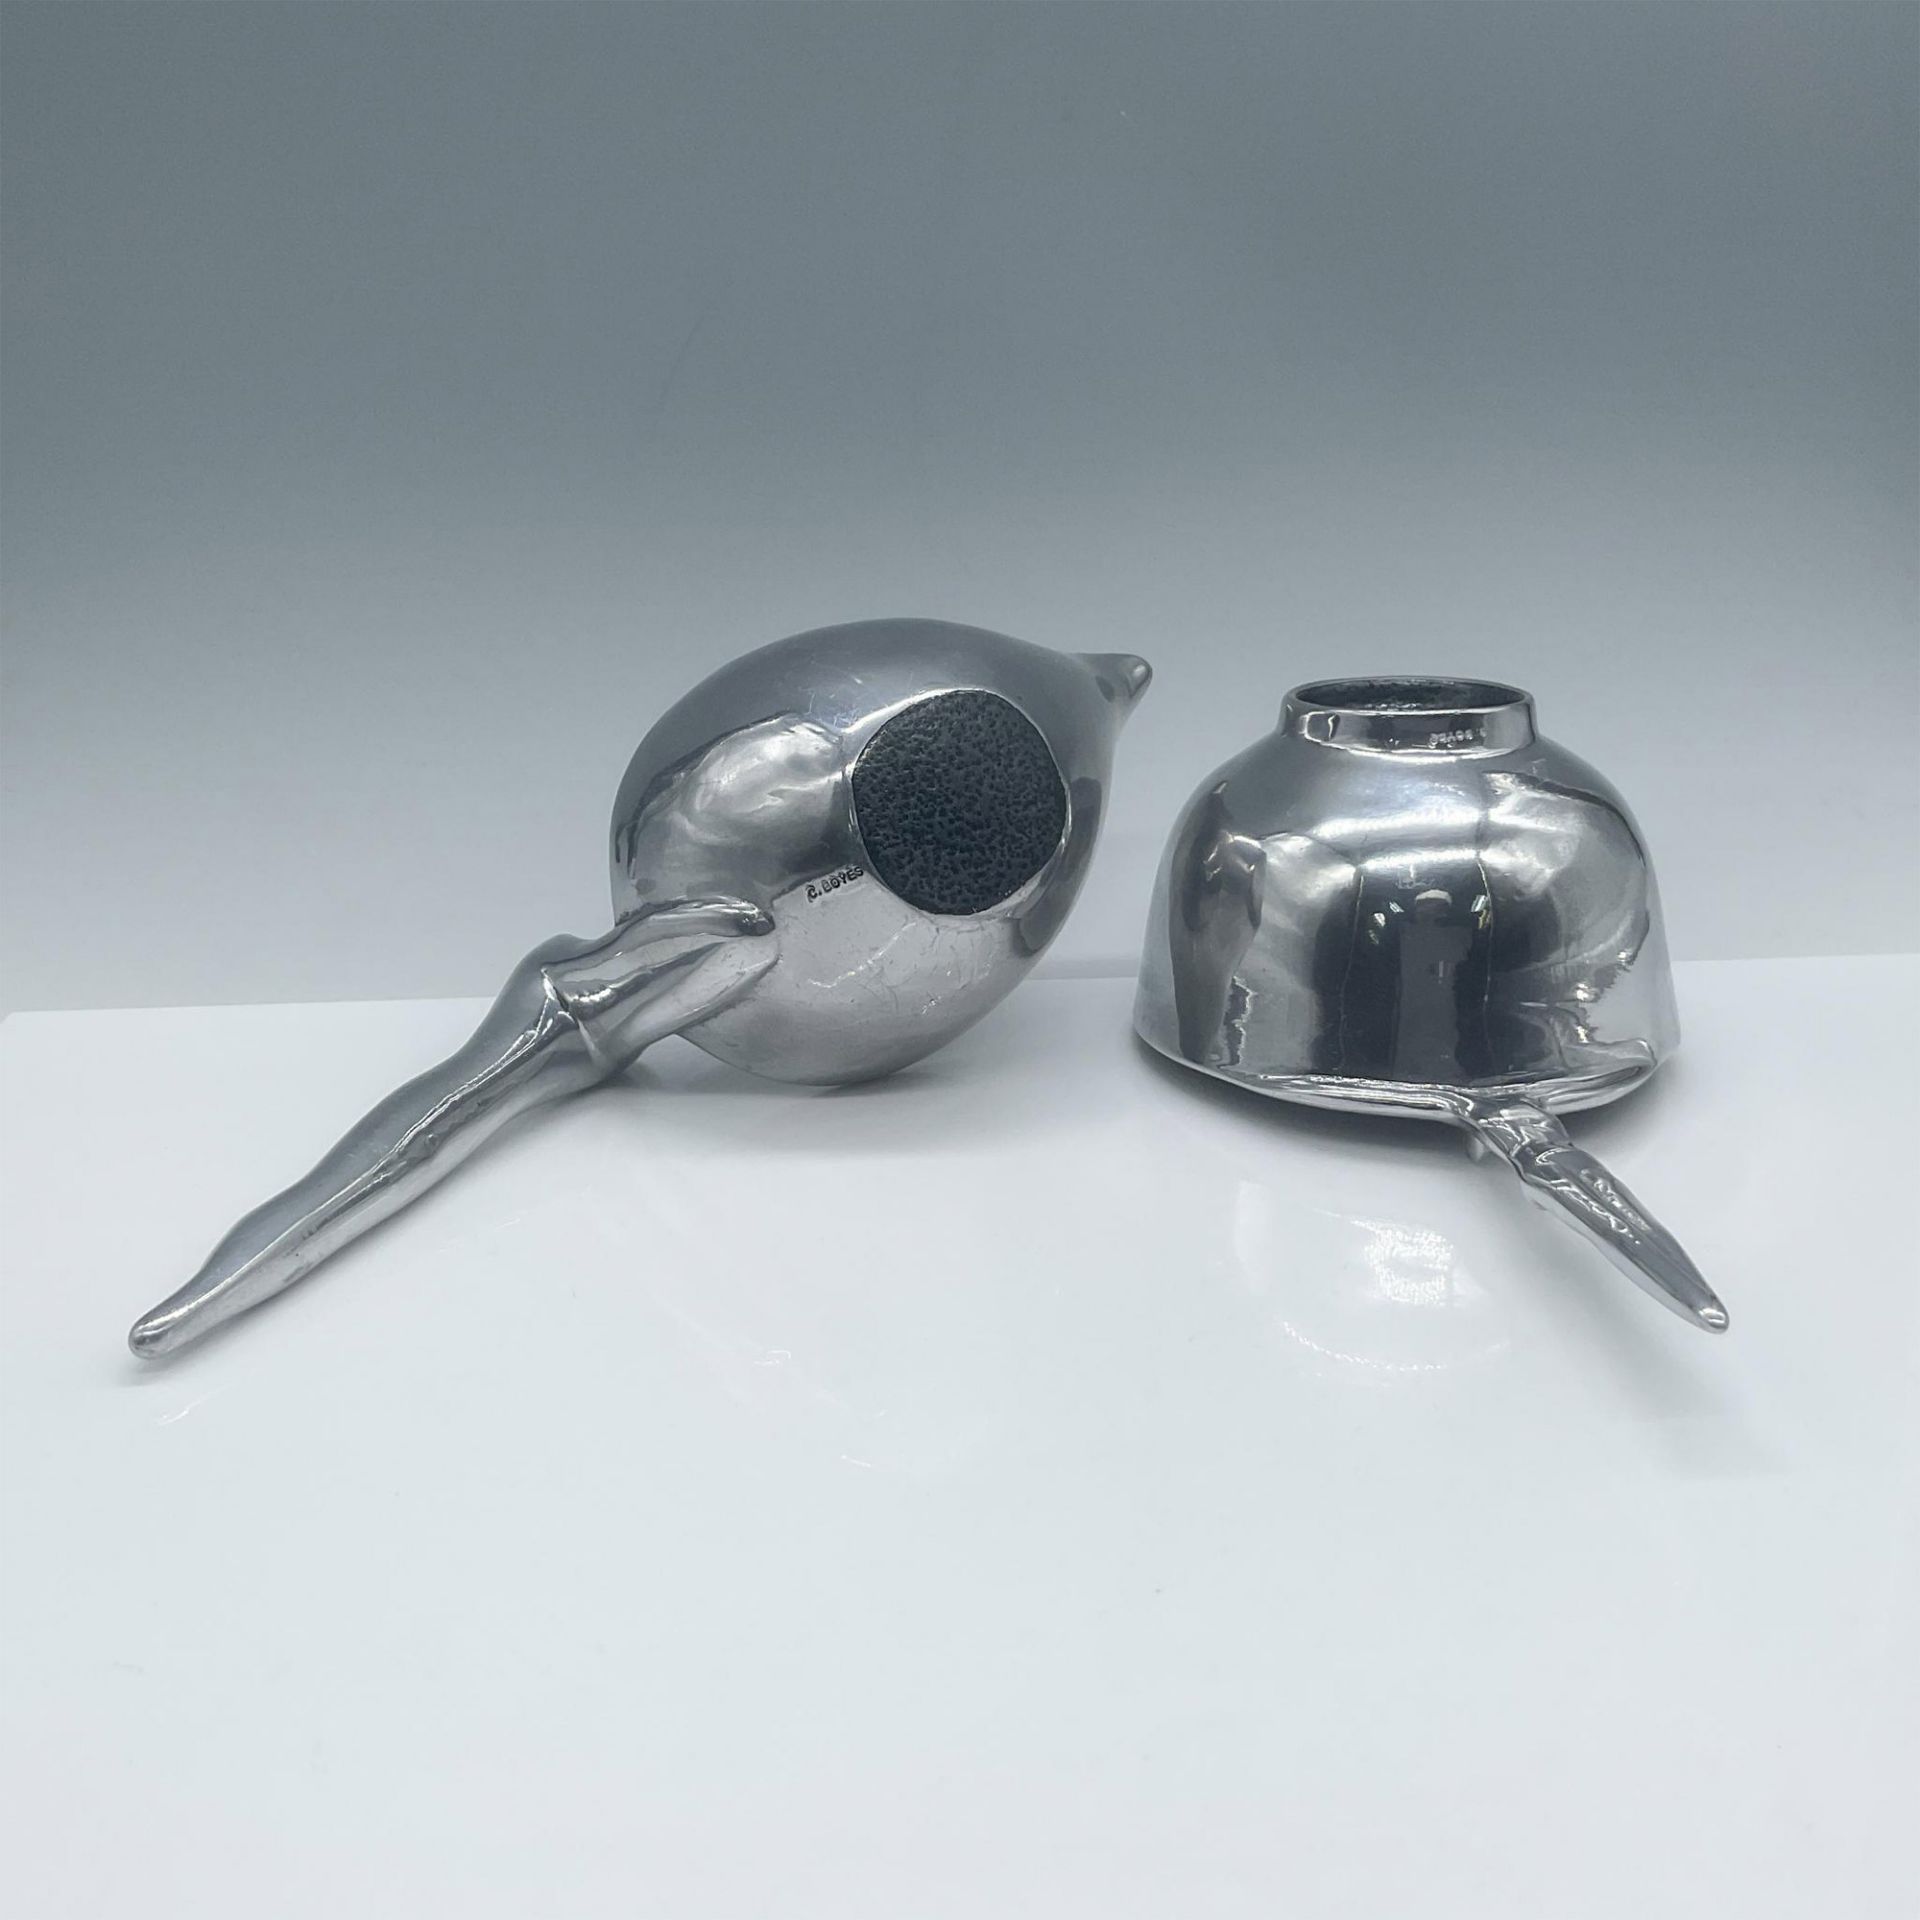 2pc Carrol Boyes Aluminum Sauce Boat and Bowl, Acrobats - Image 4 of 6